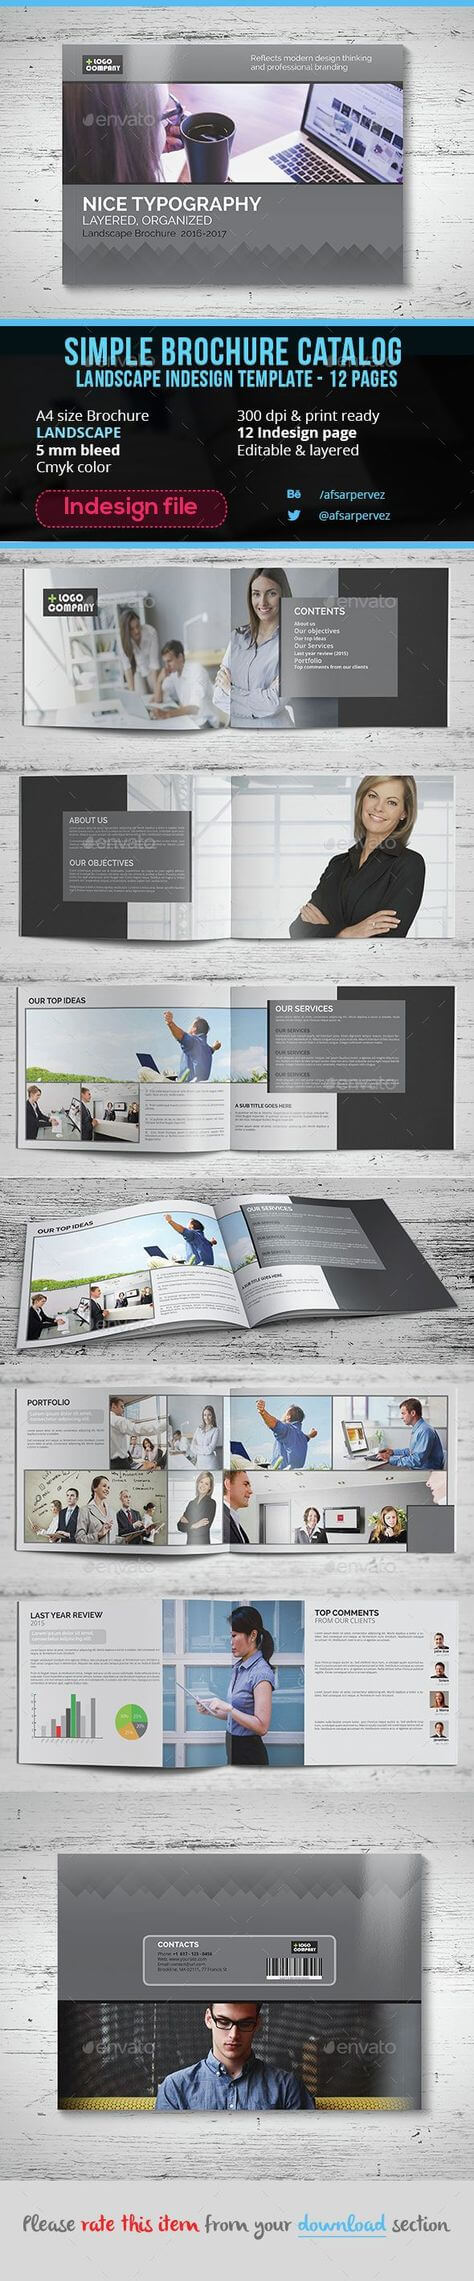 Simple Landscape Brochure Indesign Template – 12 Page Throughout 12 Page Brochure Template